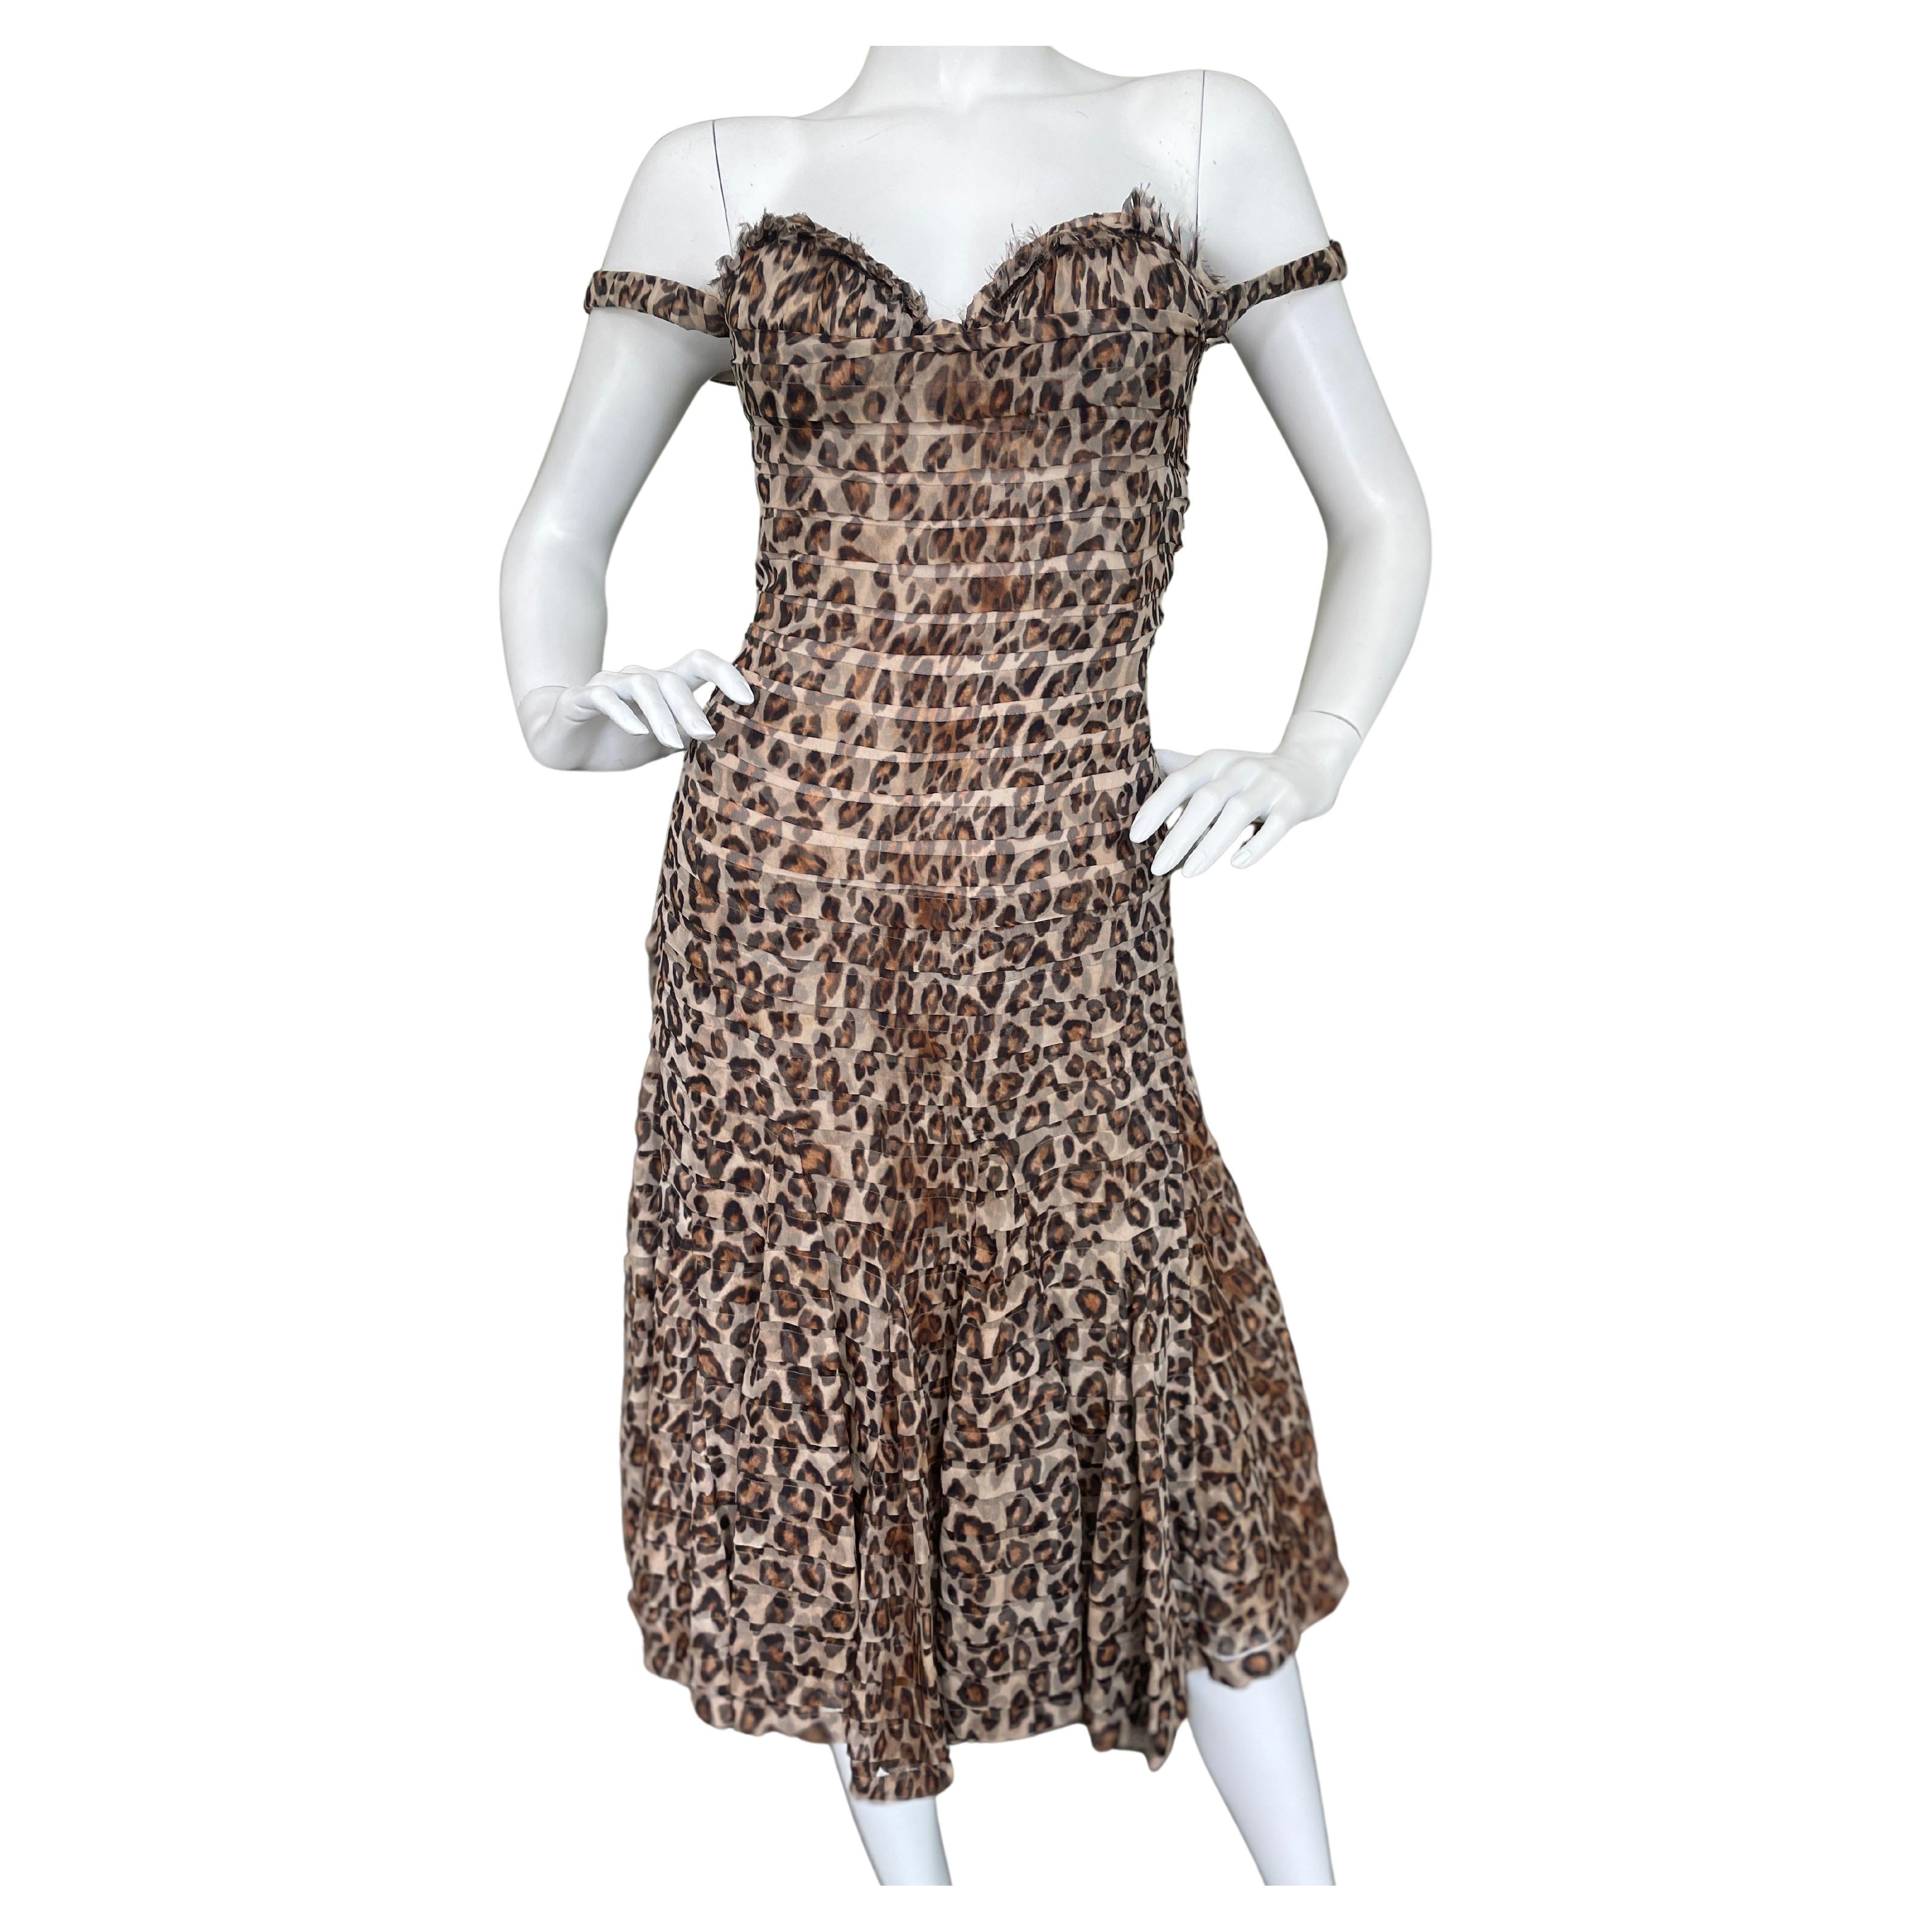 Alexander McQueen 2005 Leopard Print Cocktail Dress with Inner Corset For Sale